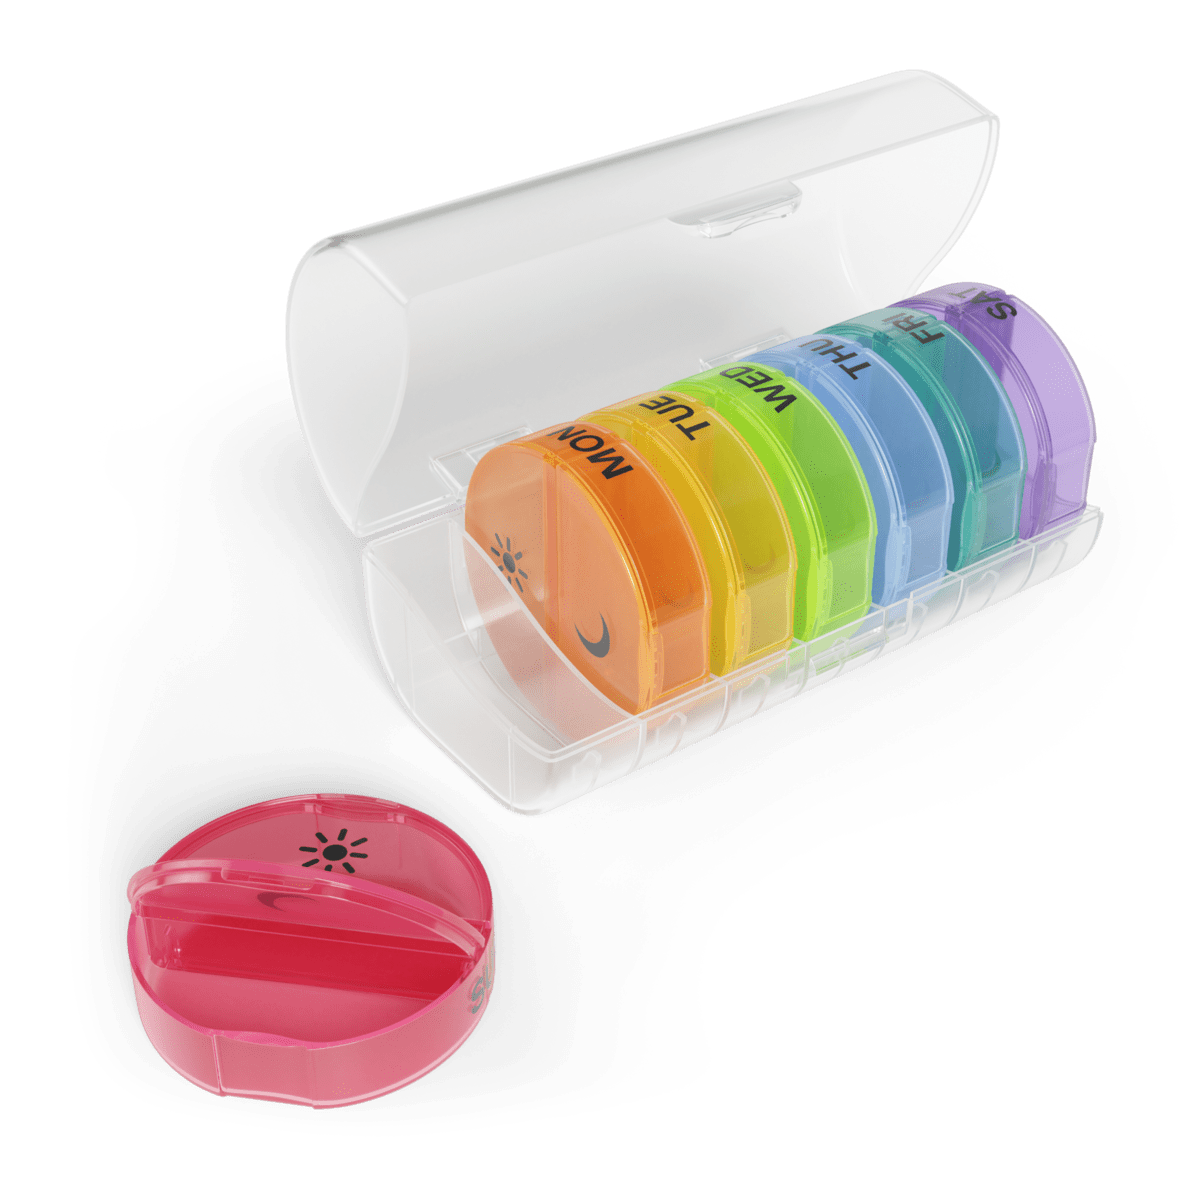 Maxpert AM/PM (7 Day) Weekly Round Travel Pill Organizer in Case, Rainbow -  Maxpert Medical